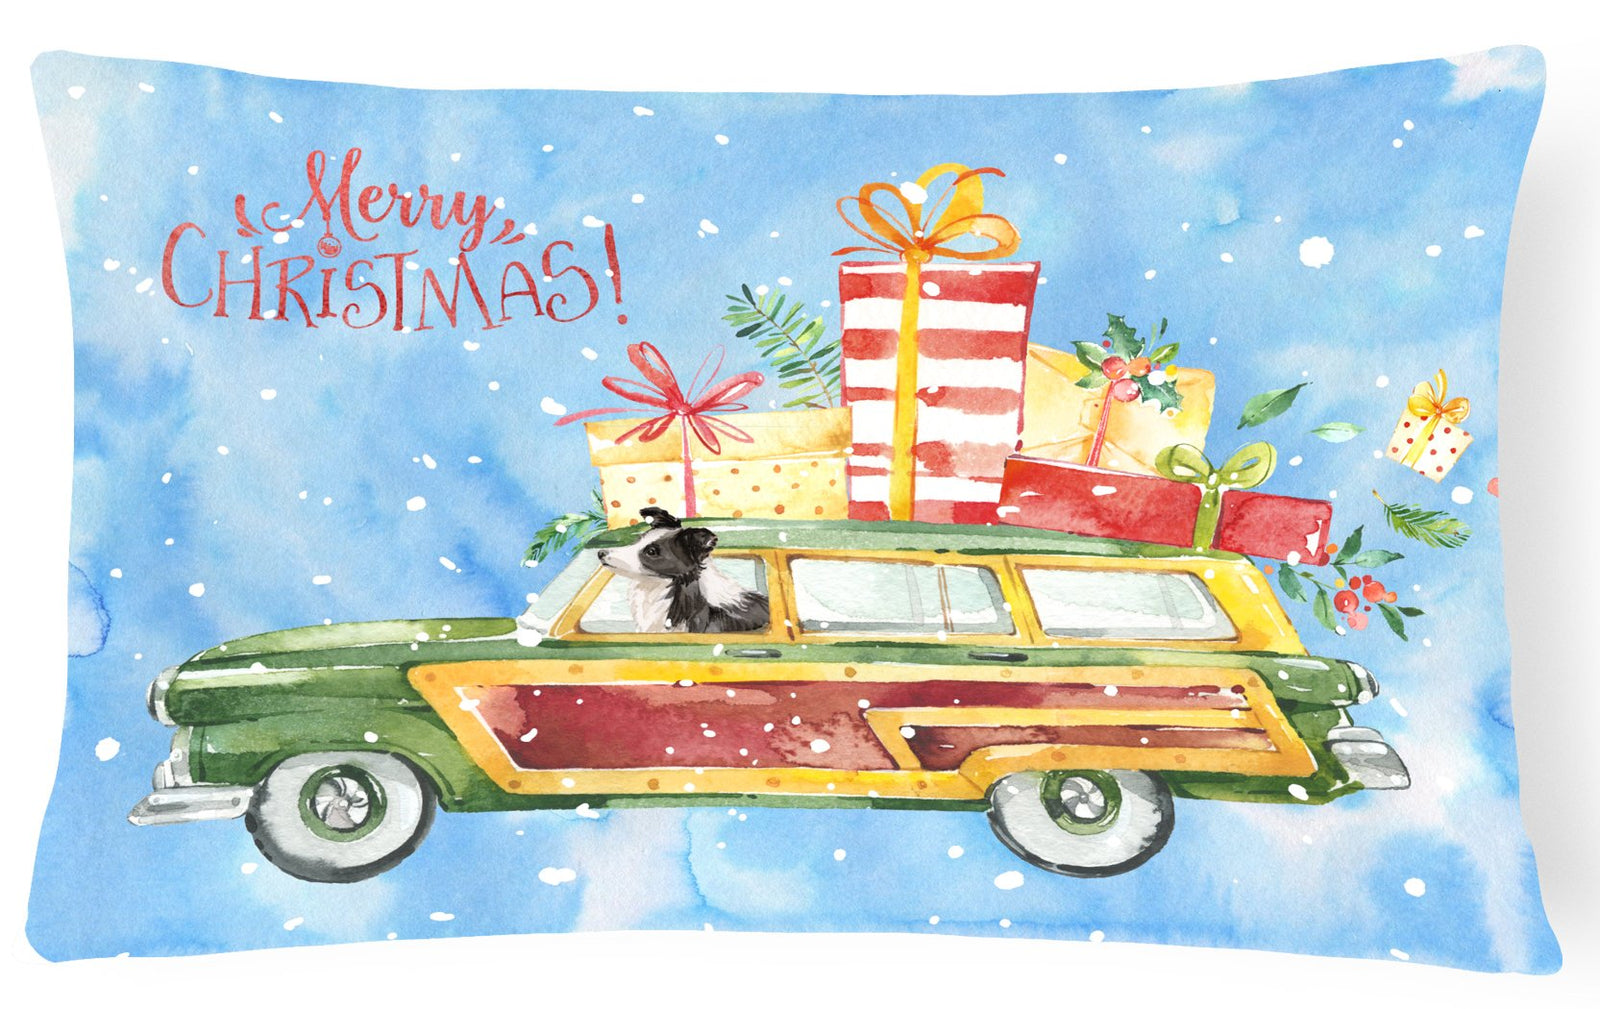 Merry Christmas Border Collie Canvas Fabric Decorative Pillow CK2445PW1216 by Caroline's Treasures